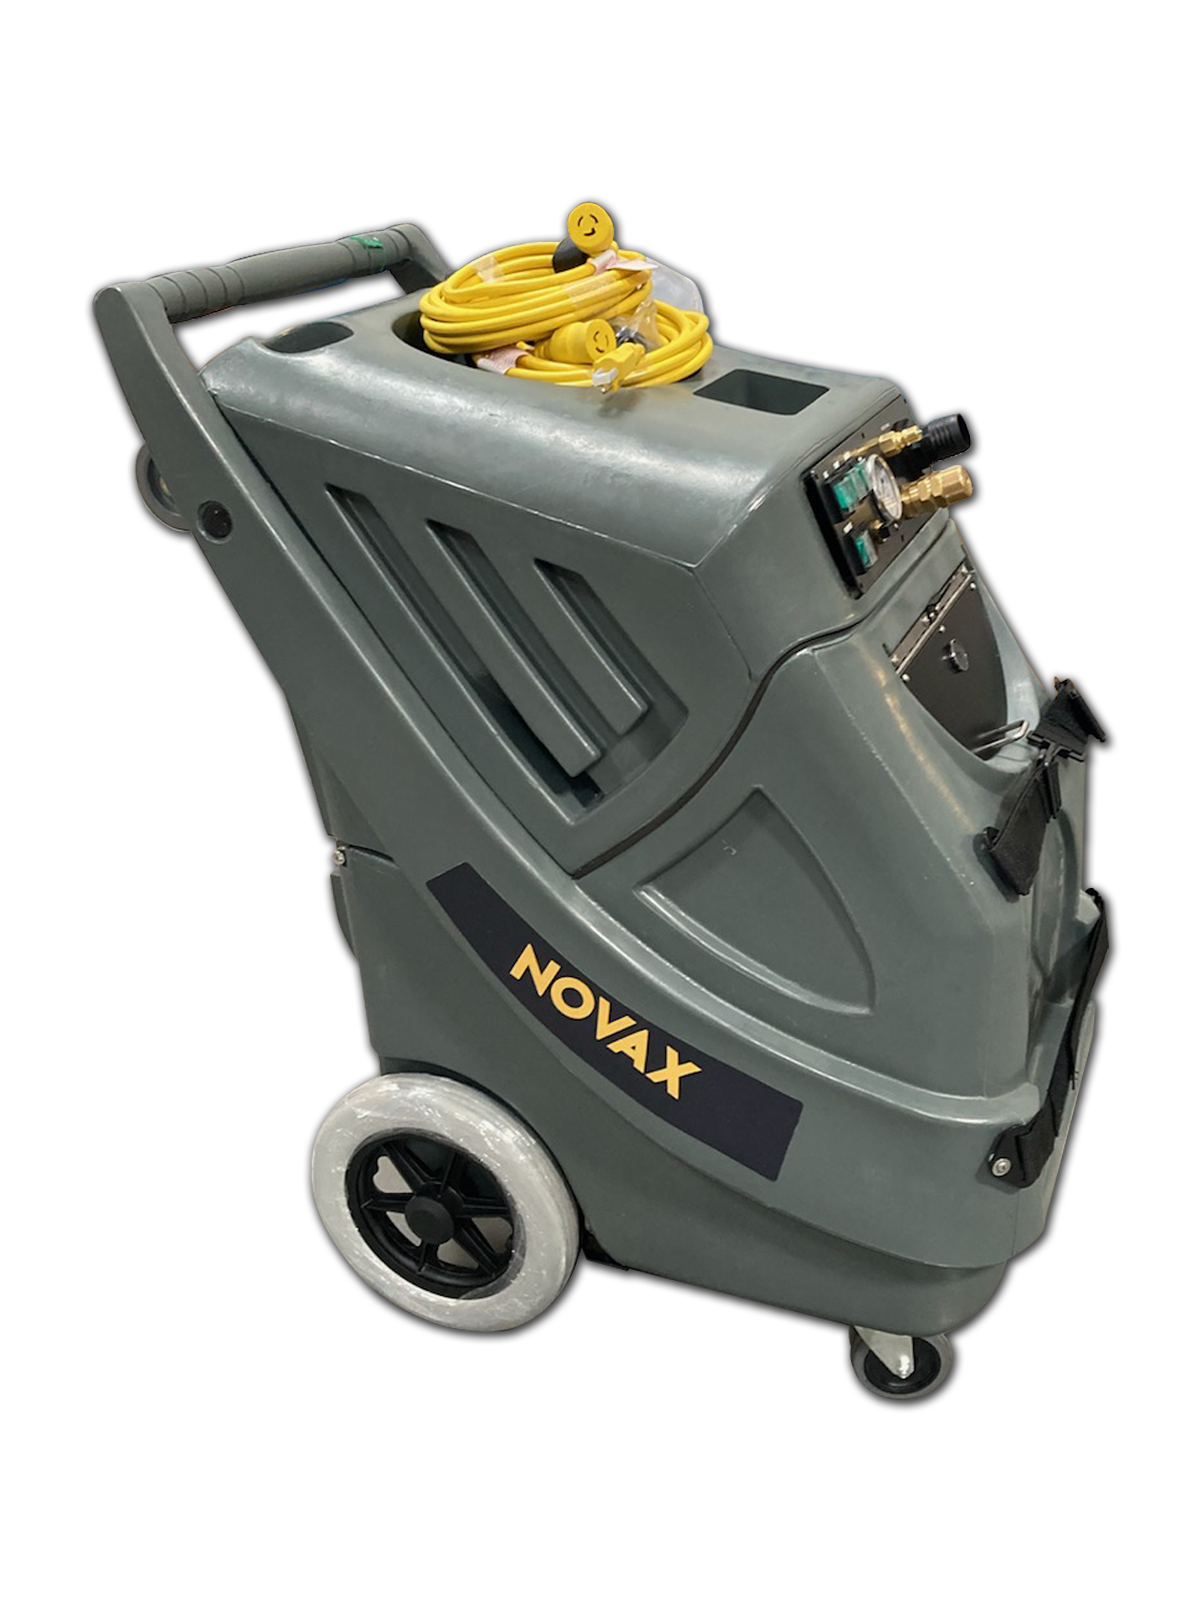 Novax 13 Gallon Multi-Surface Cleaning Extractor with Heat (1200 PSI)